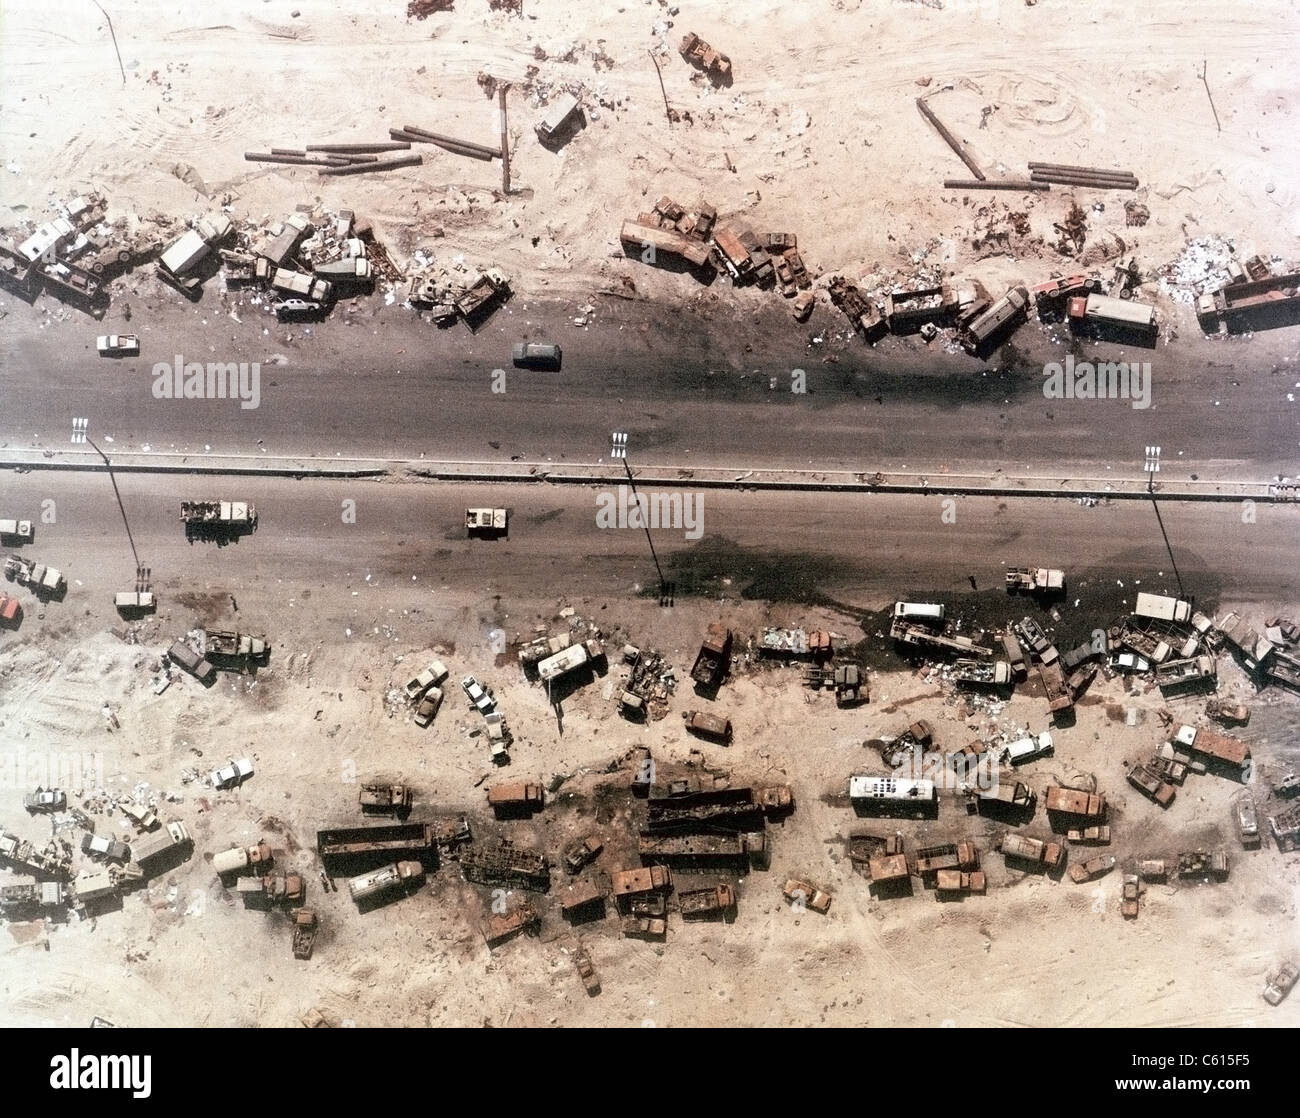 Aerial view of destroyed Iraqi vehicles beside the Highway 80 west of Kuwait City. The 'Highway of Death ' was bombed by coalition forces on February 27-28 1991 in the last days of Operation Desert Storm. (BSLOC 2011 12 12) Stock Photo